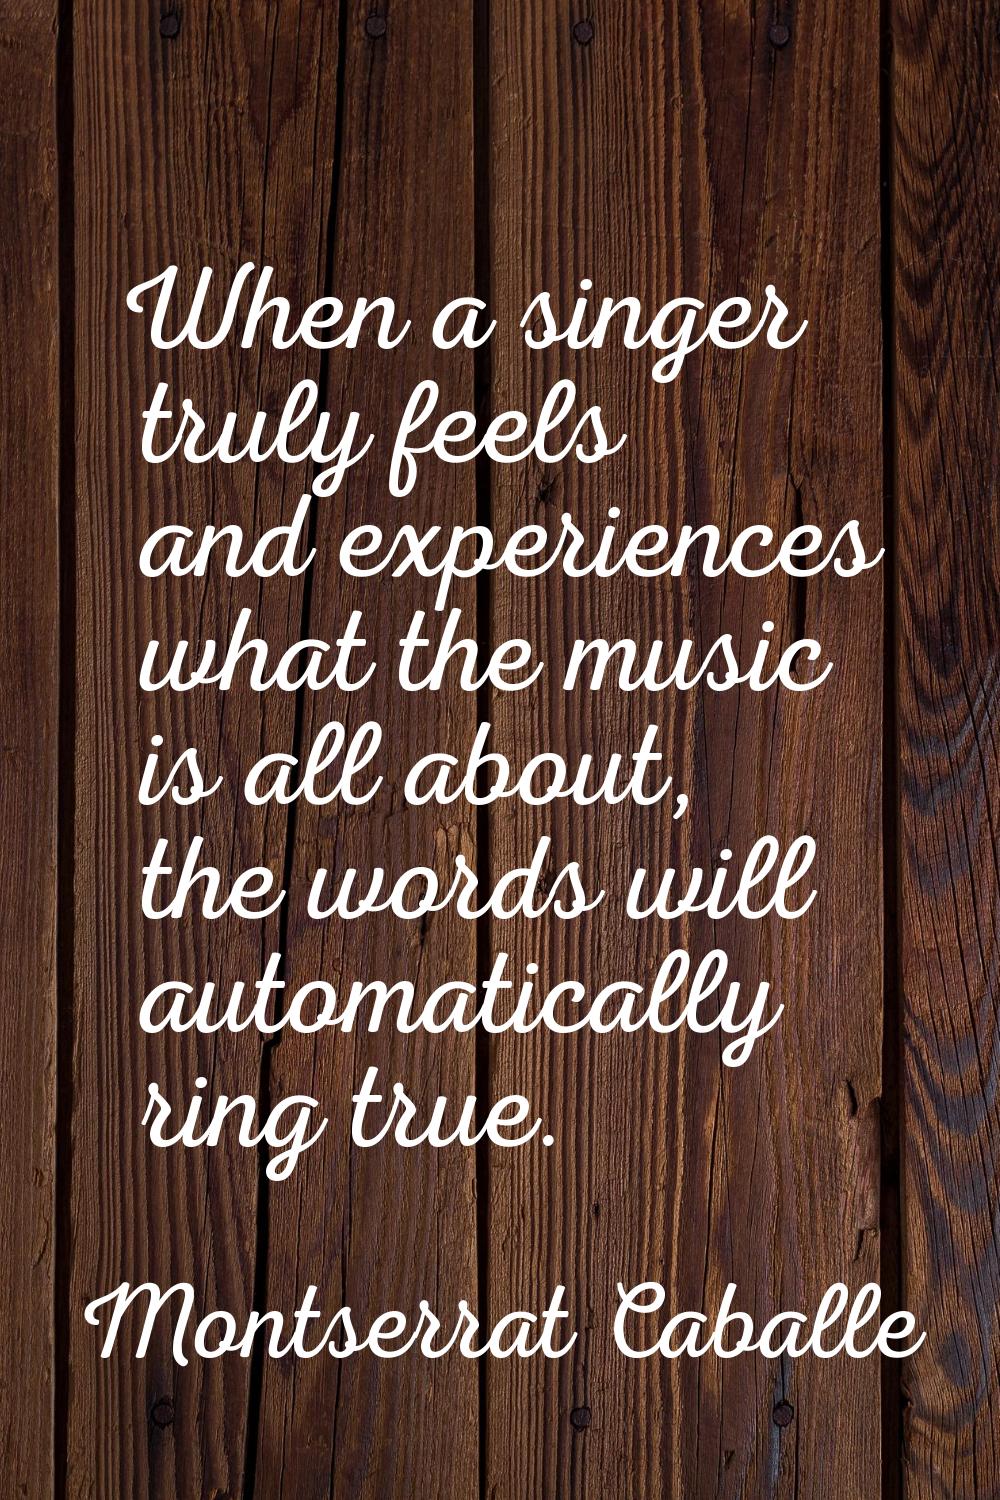 When a singer truly feels and experiences what the music is all about, the words will automatically